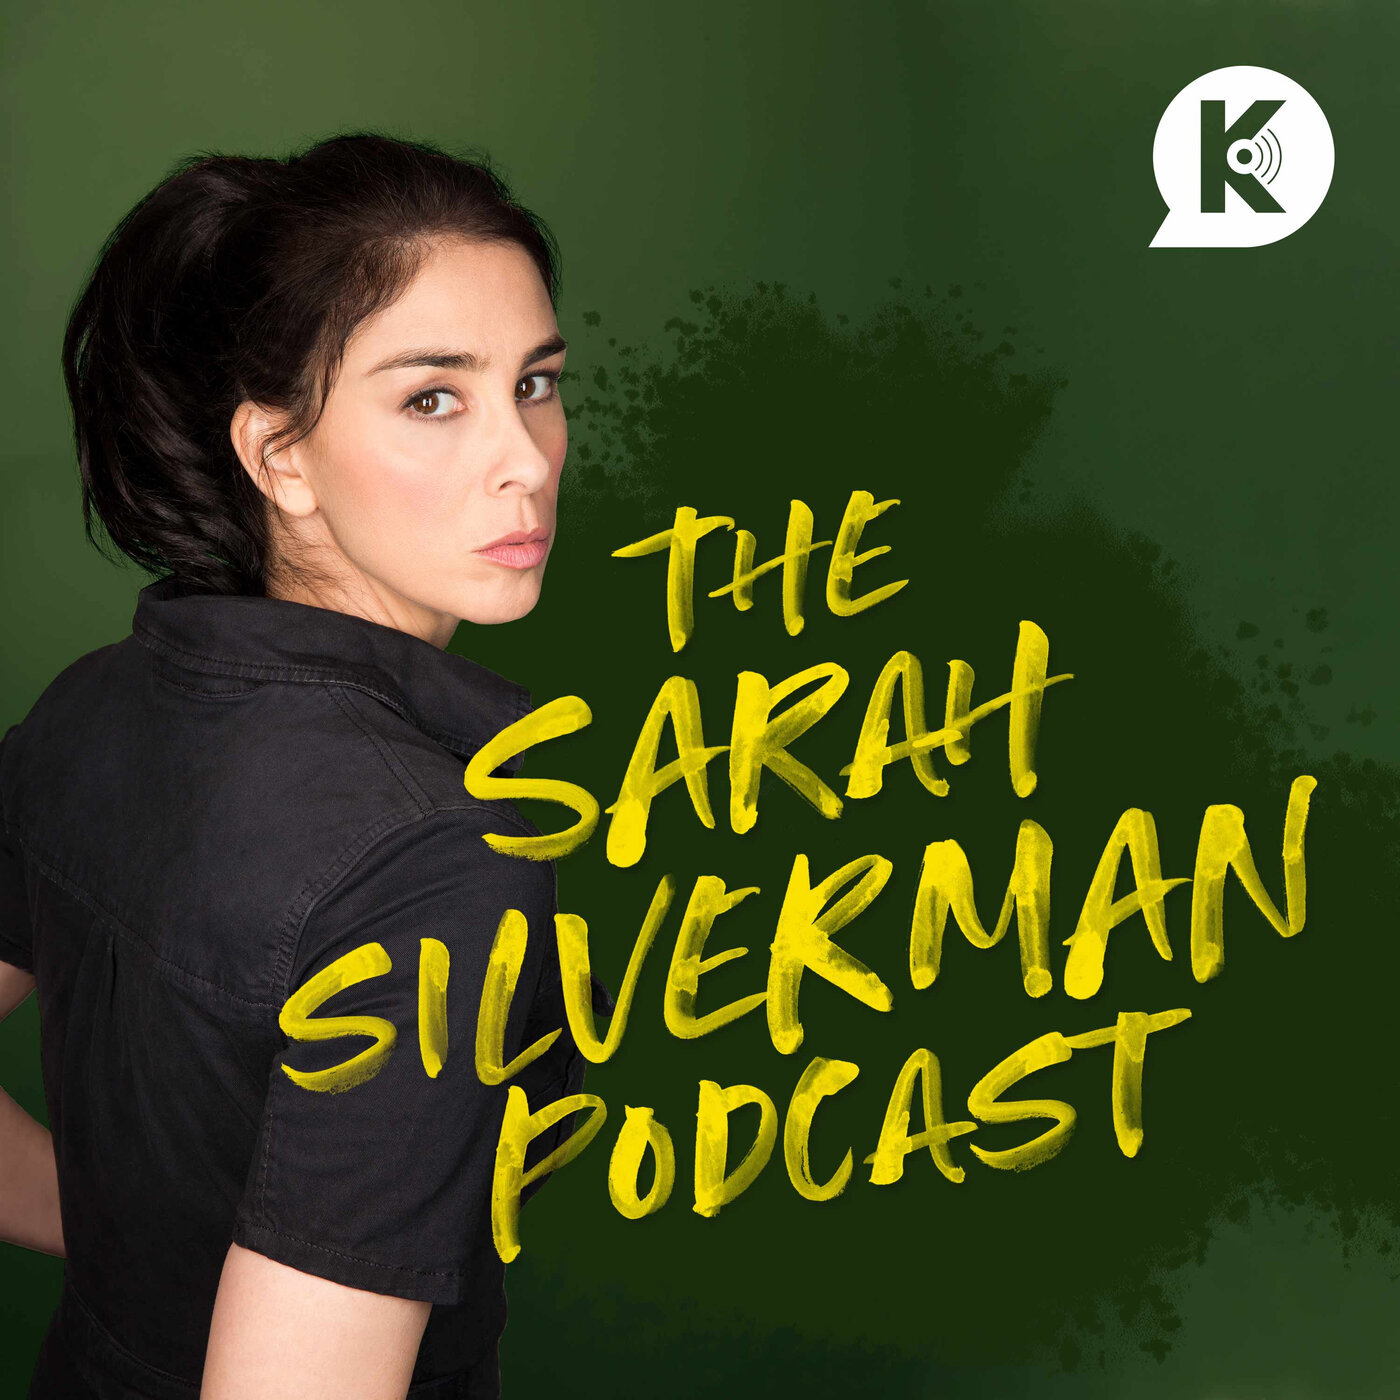 The Comeback, Peddlers, Jibe | The Sarah Silverman Podcast